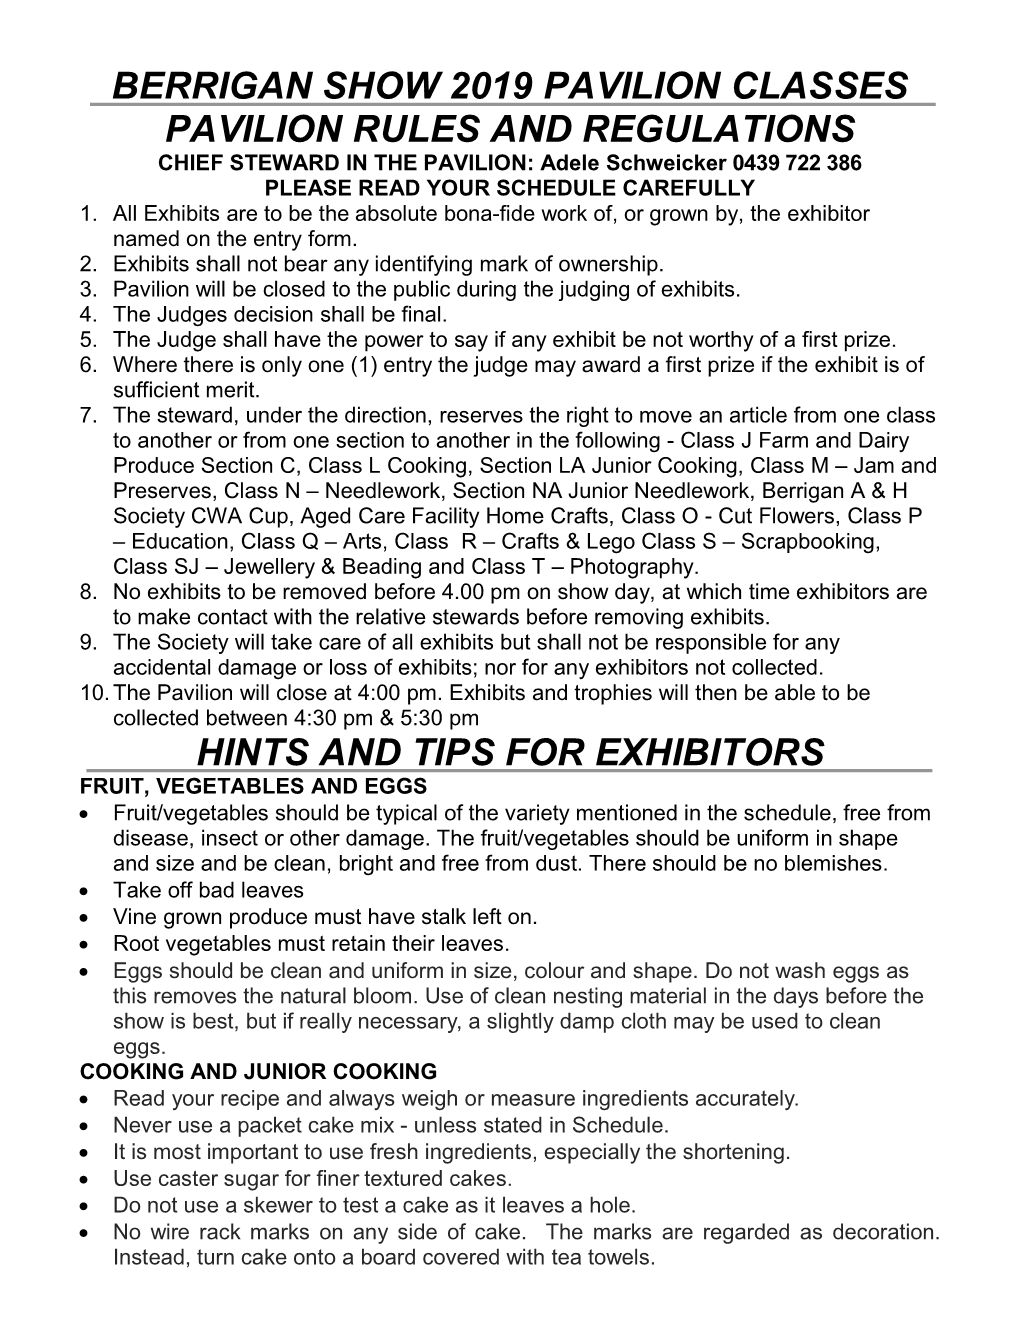 BERRIGAN SHOW 2019 PAVILION CLASSES PAVILION RULES and REGULATIONS CHIEF STEWARD in the PAVILION: Adele Schweicker 0439 722 386 PLEASE READ YOUR SCHEDULE CAREFULLY 1